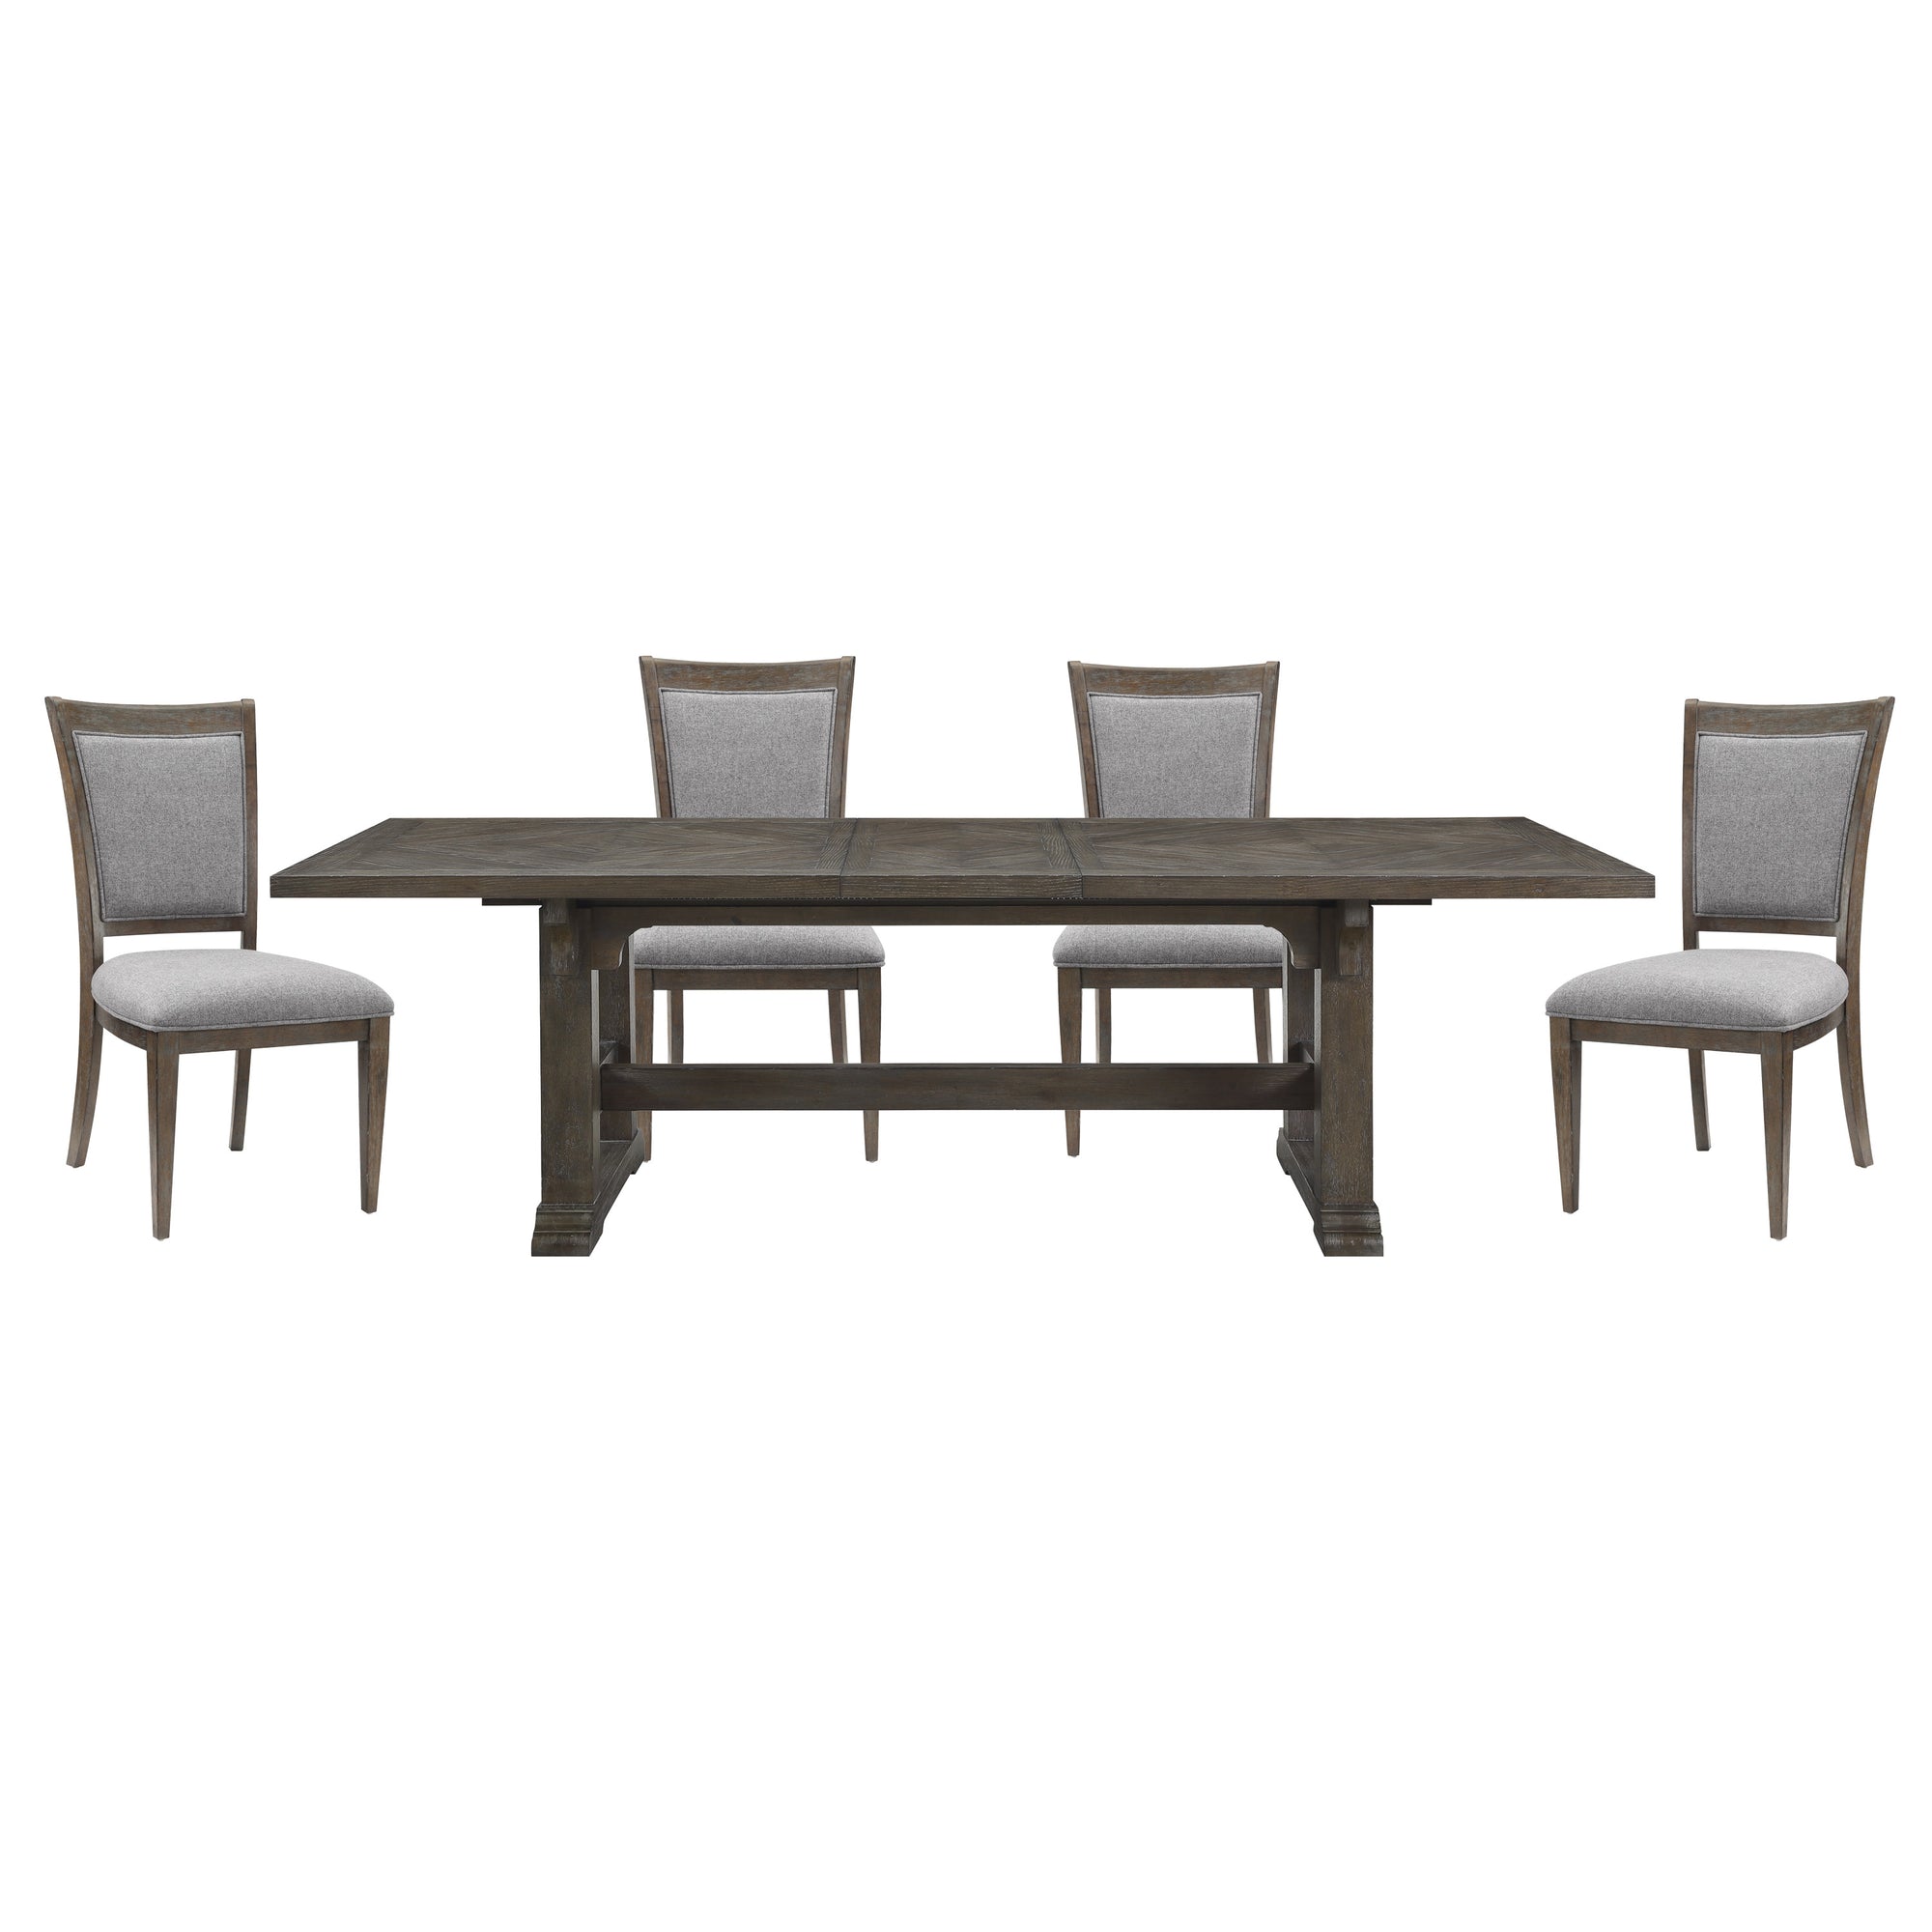 Grayling Downs 5-Piece Dining Set